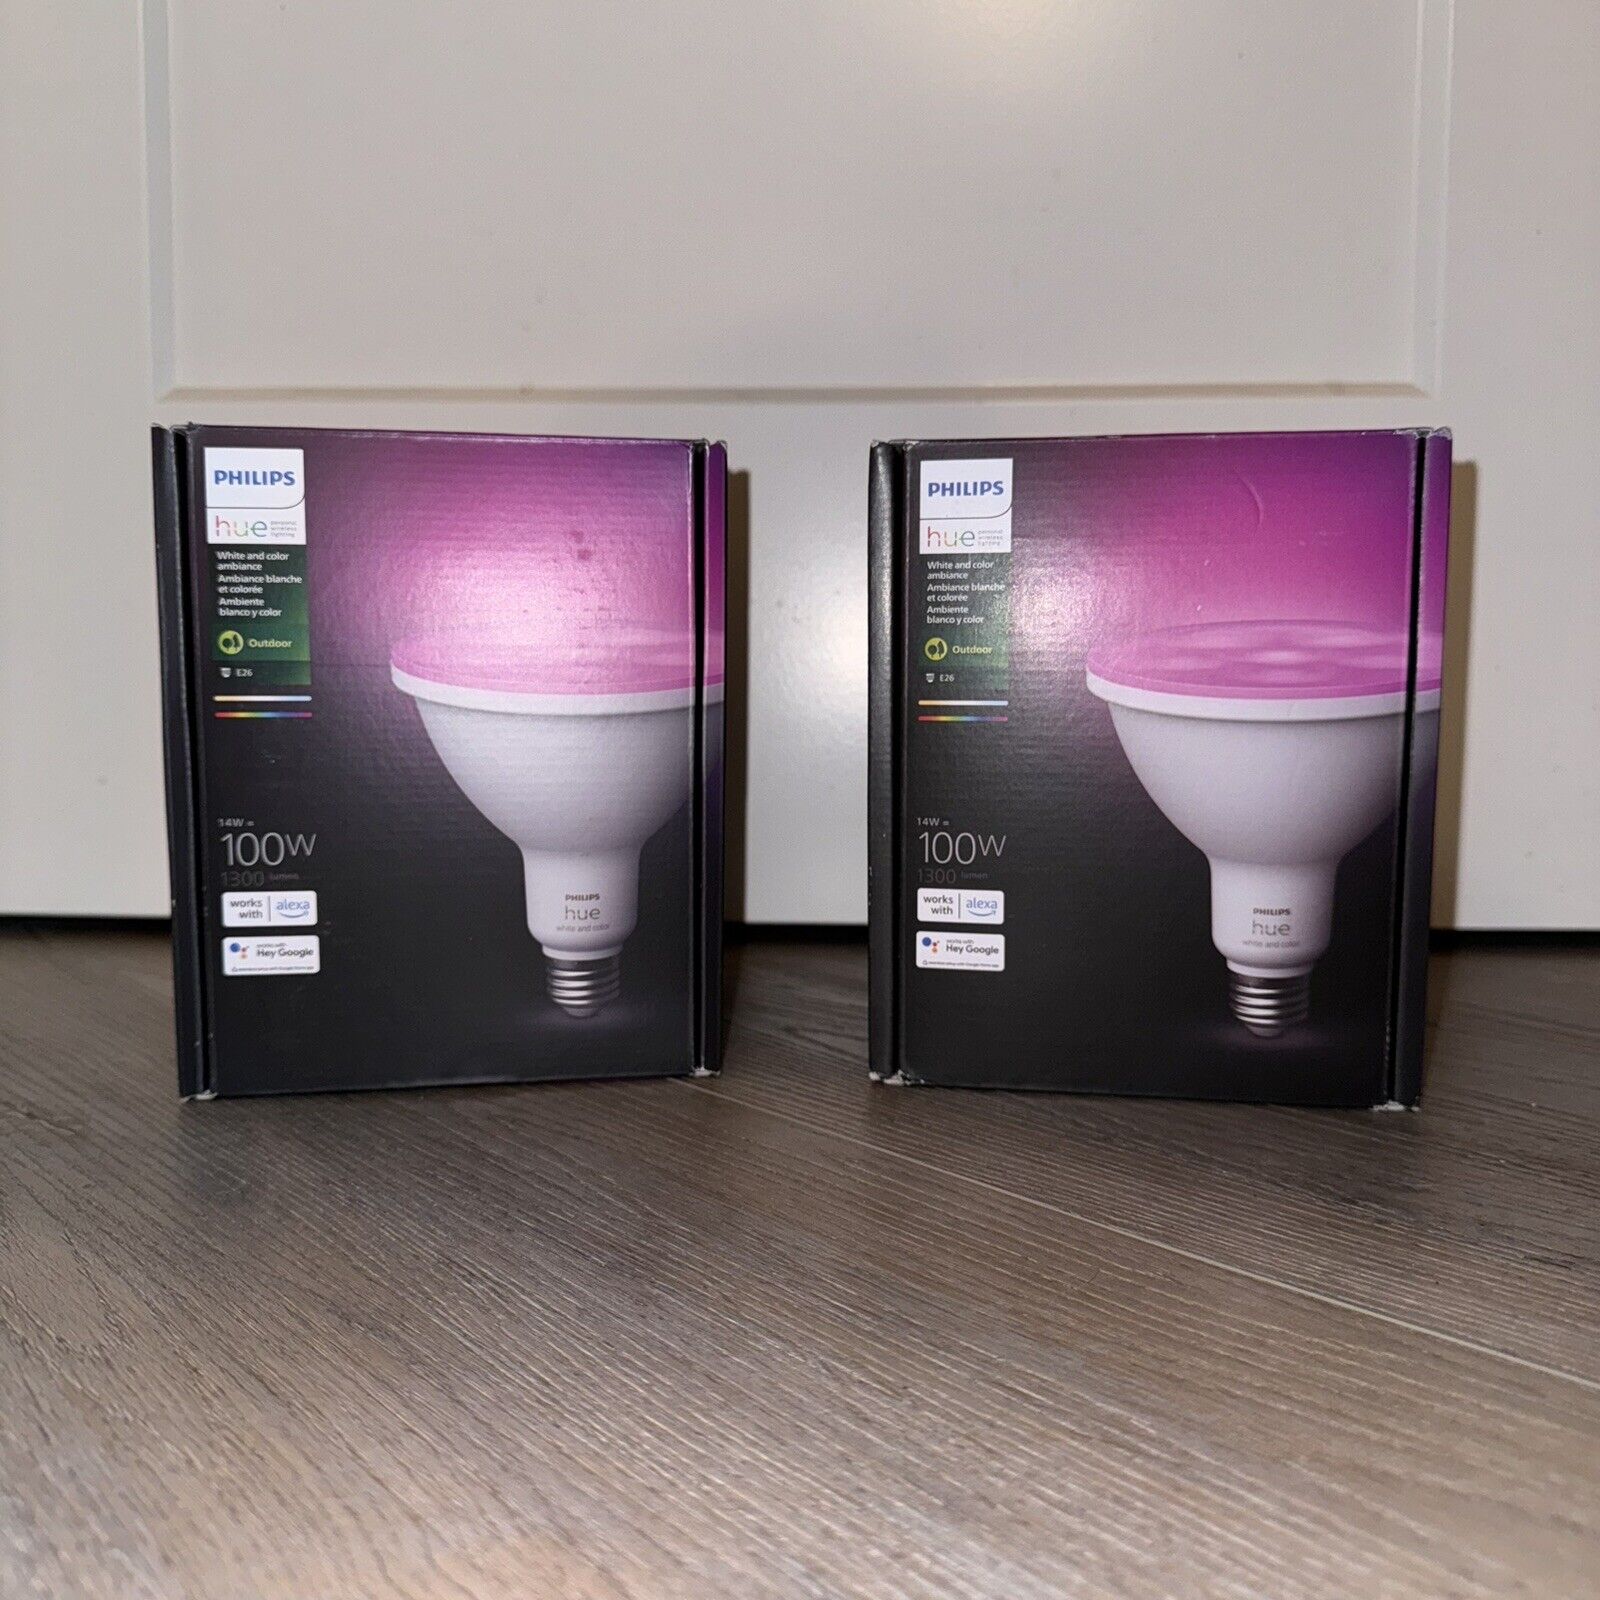 NEW Philips Hue PAR38 100W Smart LED Bulb White and Color Ambiance - Set of 2